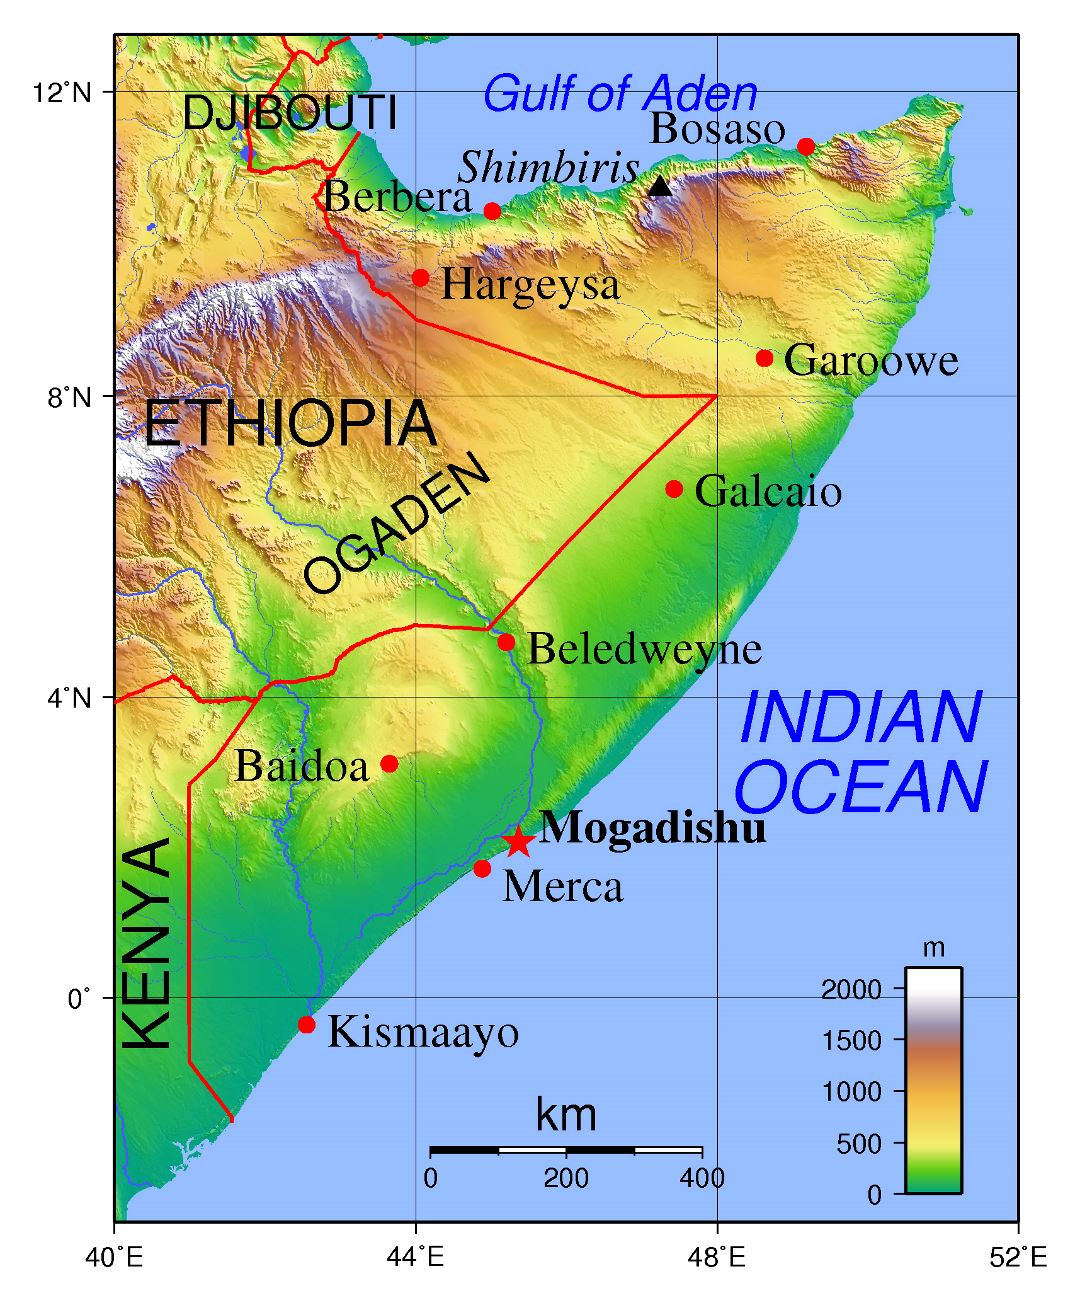 Large topographical map of Somalia with major cities